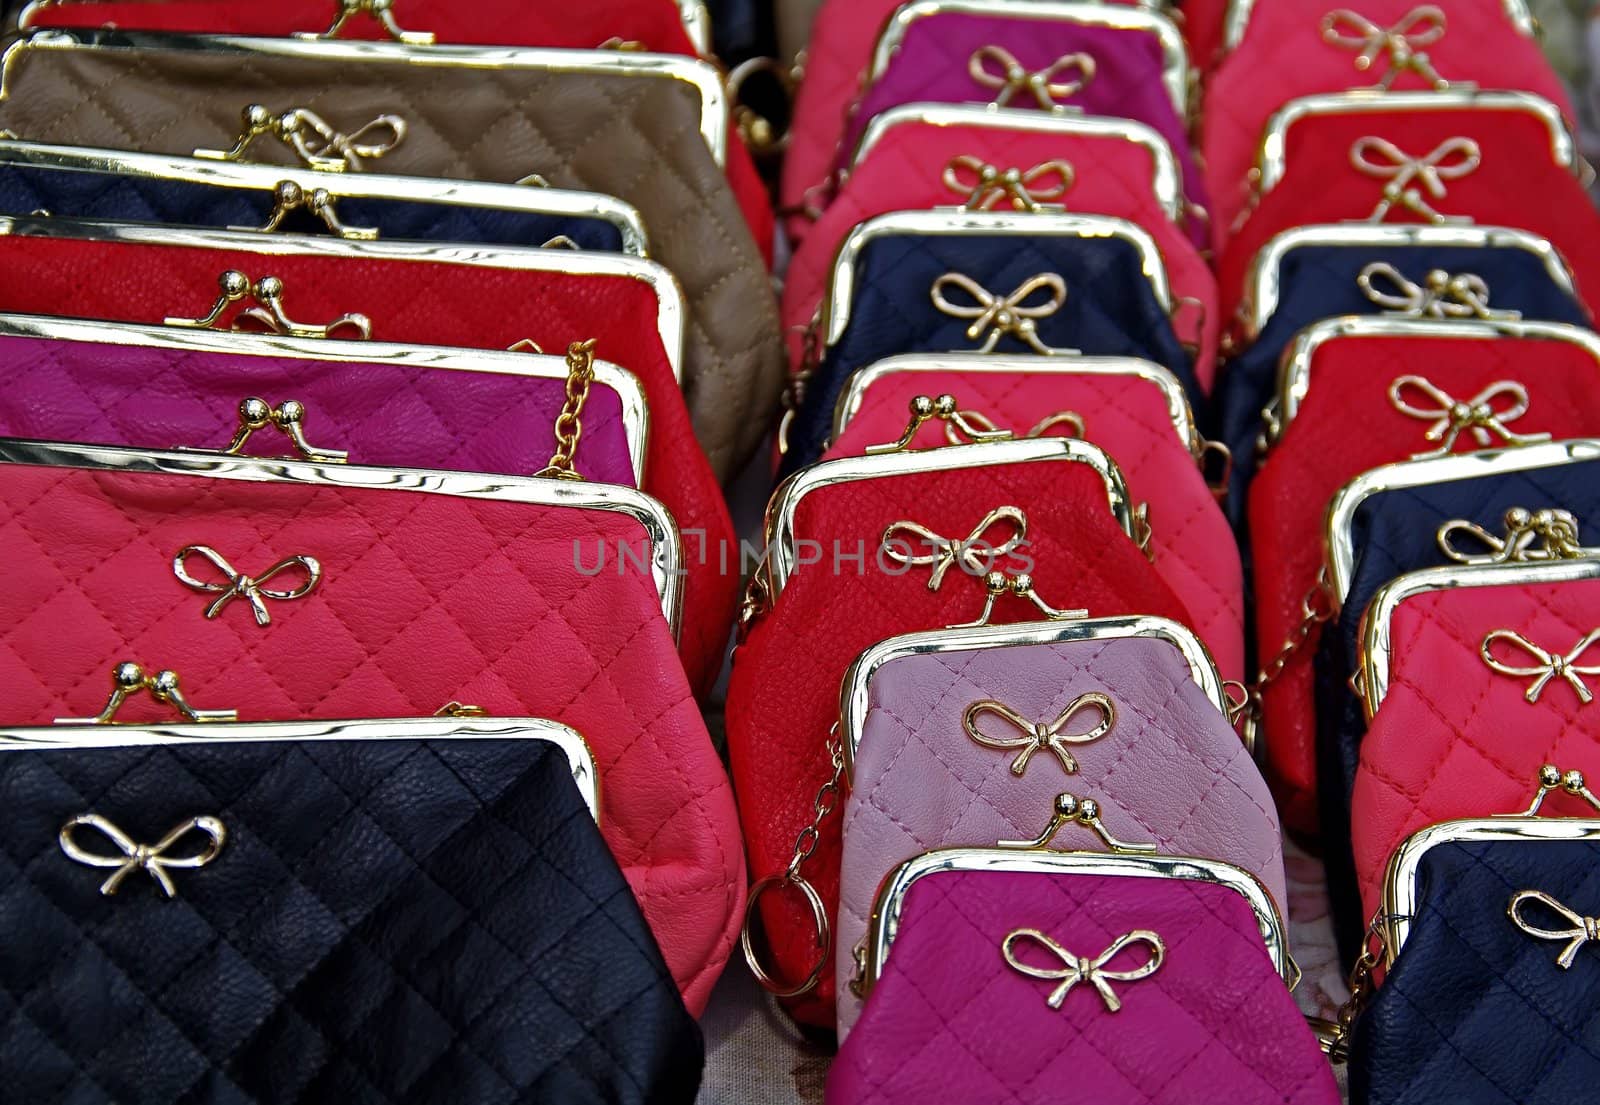 Number of purses with diffenrt colors and sizes